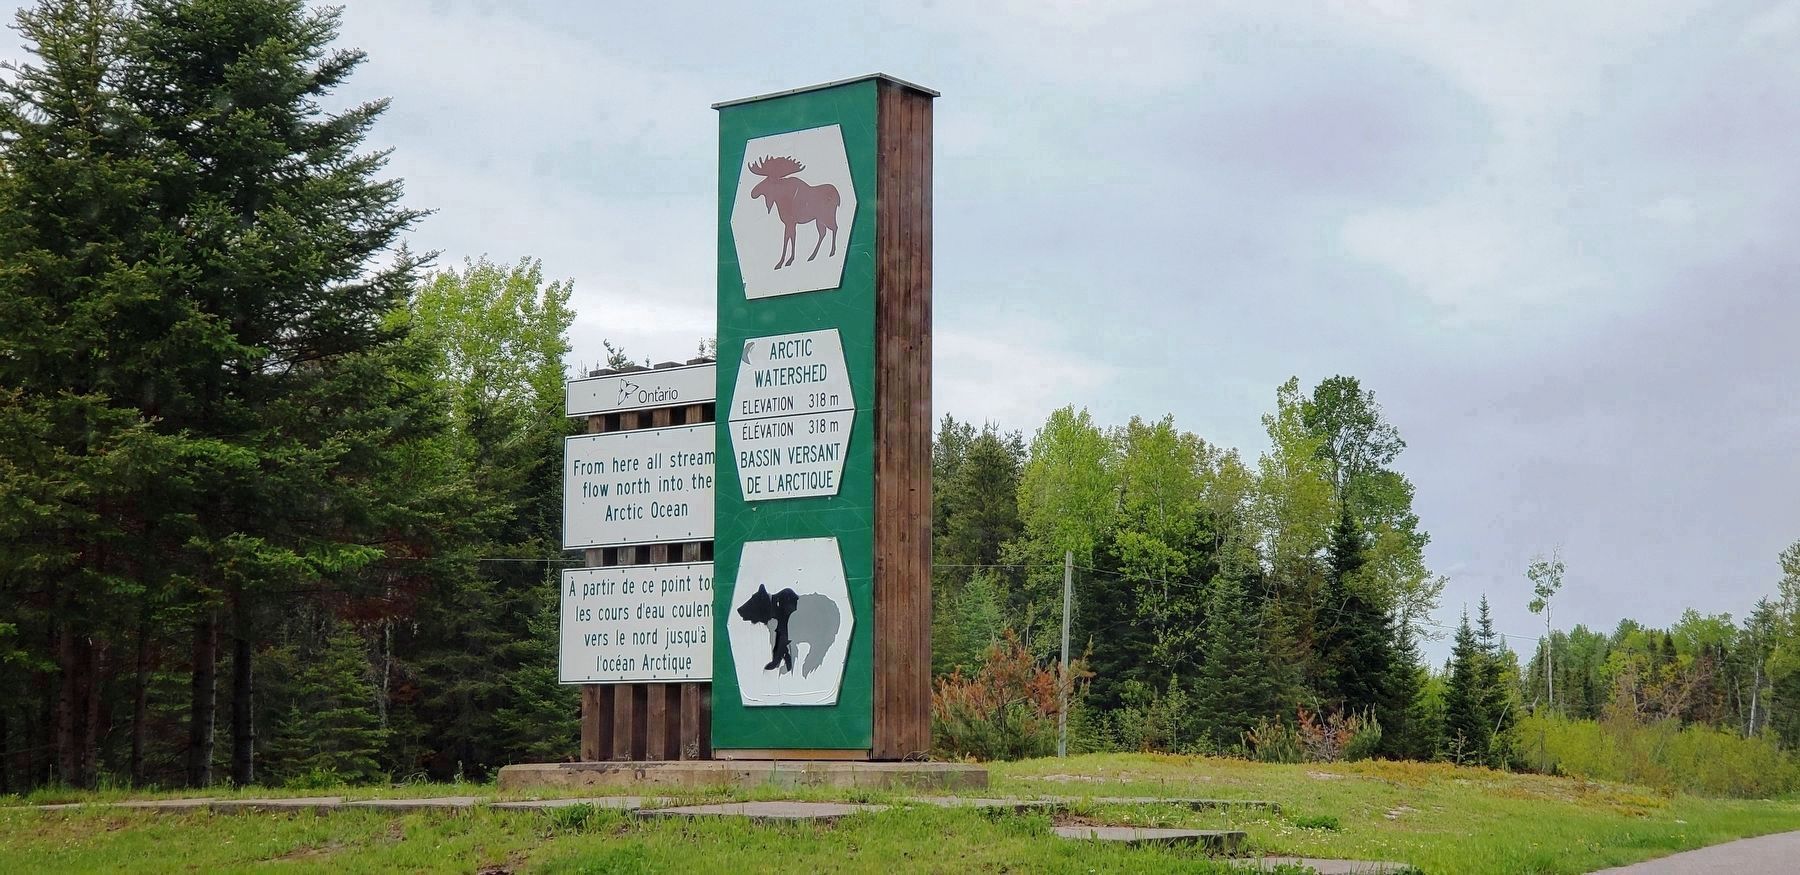 Arctic Watershed Sign (<i>as seen when heading north</i>) image. Click for full size.